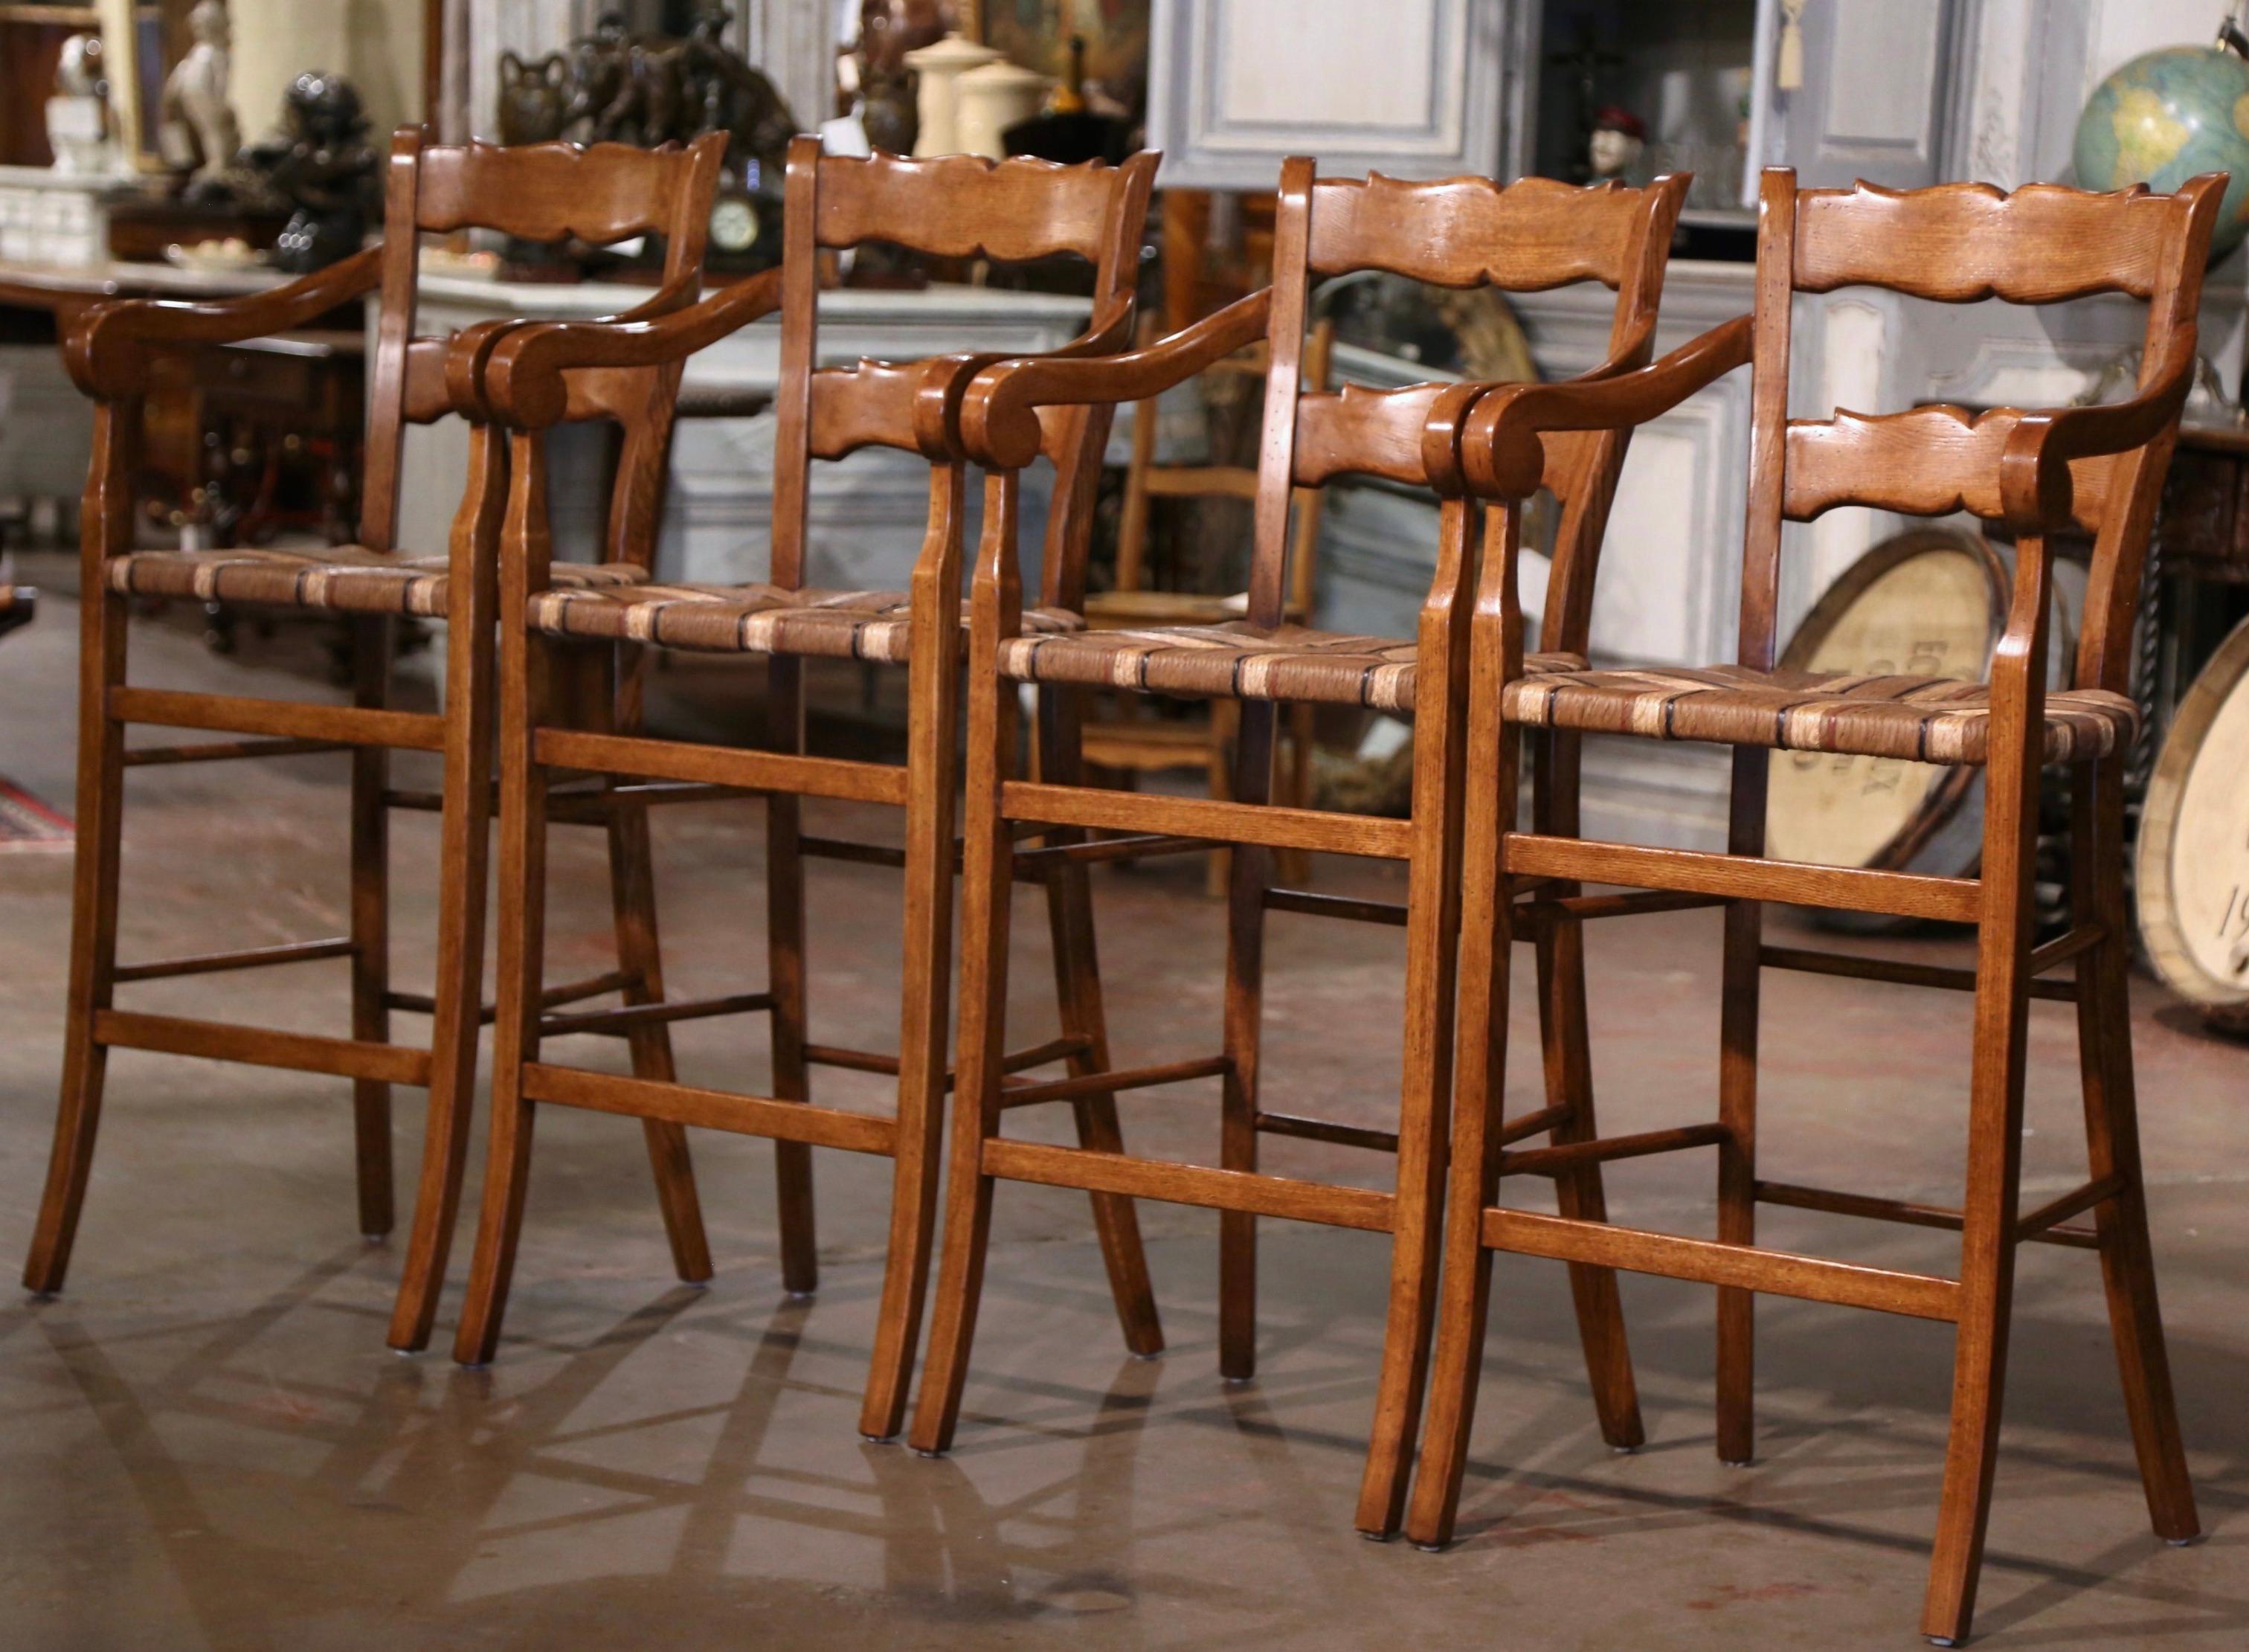 Dress a bar with this elegant set of vintage stools armchairs. Hand carved from oak wood in Normandy, France circa 1990, each chair stands on scroll legs, over a double bottom stretcher. The back has two carved scalloped ladders and is embellished